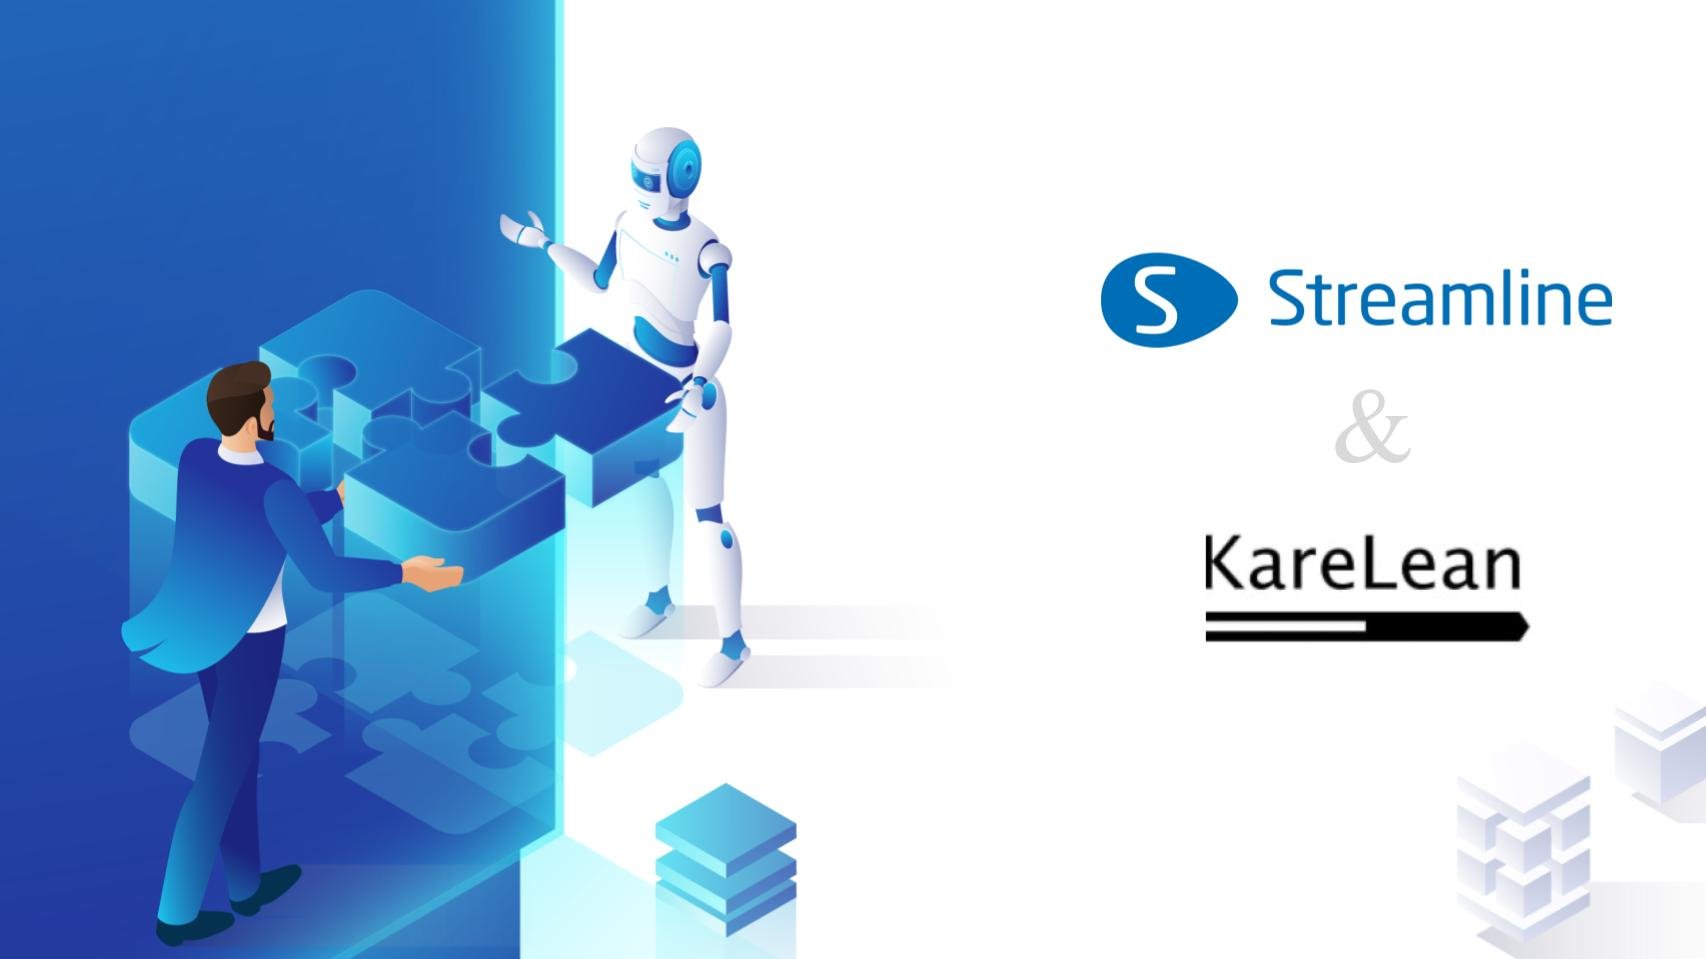 GMDH Streamline partners with KareLean, a Finnish consulting company